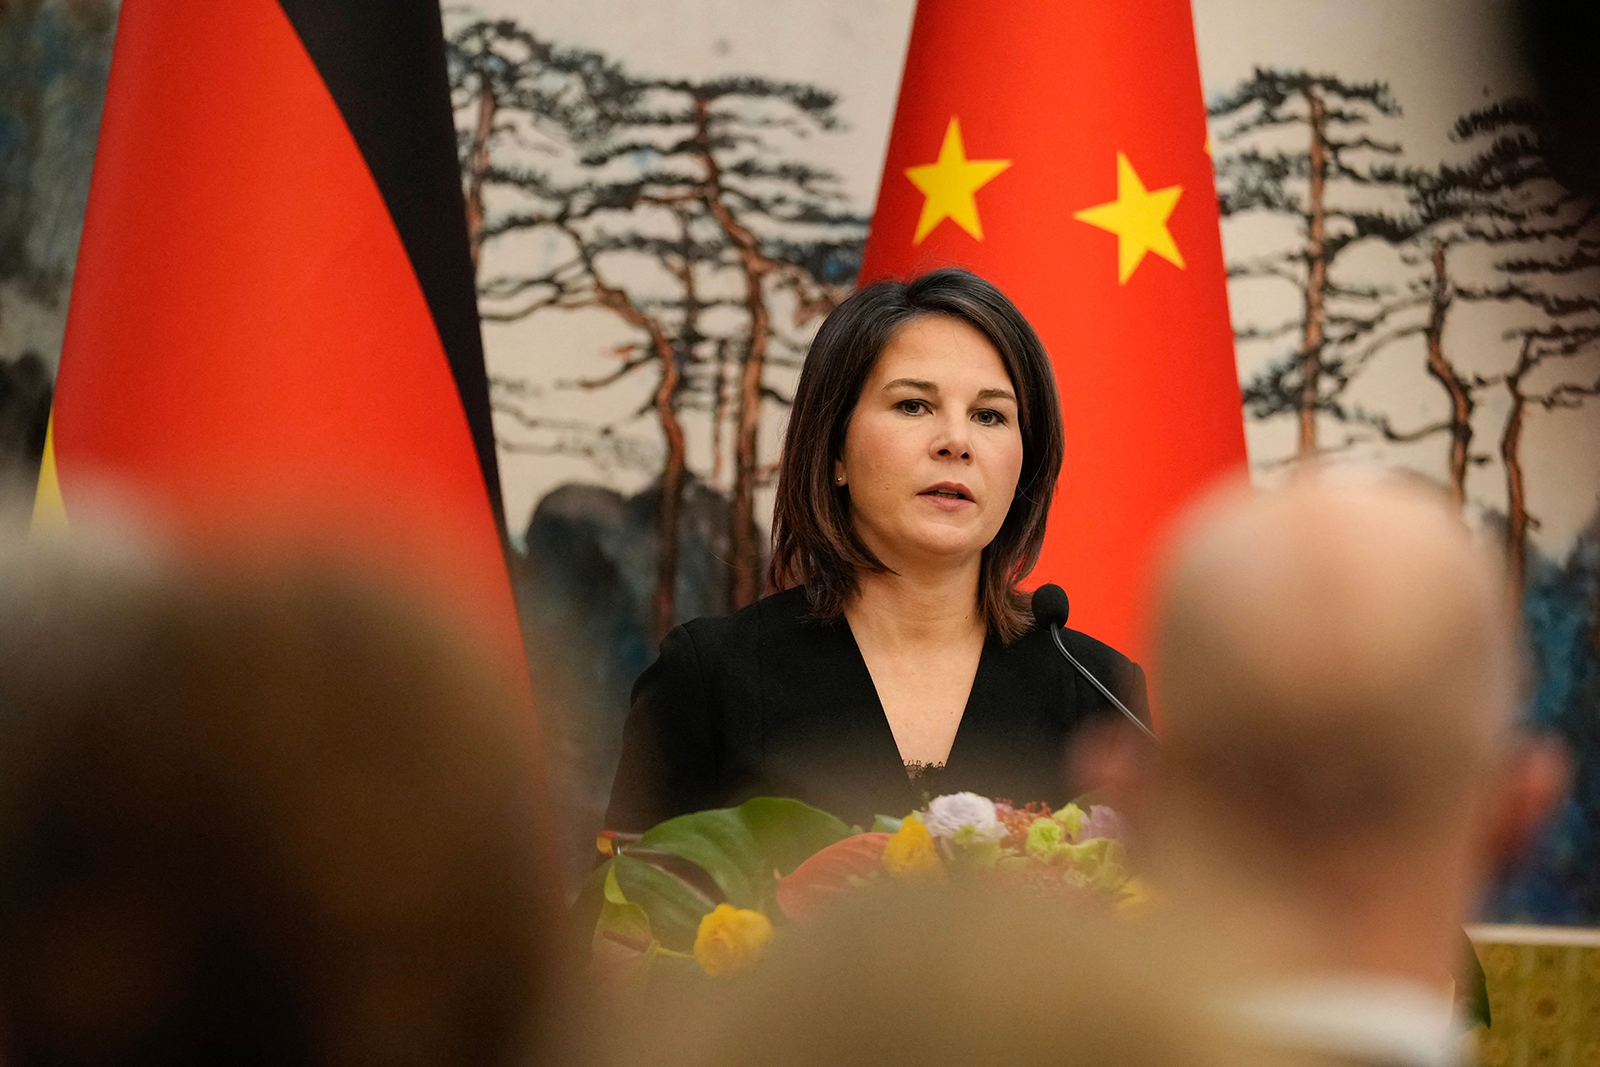 Annalena Baerbock attends a joint press conference with Chinese Foreign Minister Qin Gang at the Diaoyutai State Guesthouse in Beijing on April 14.